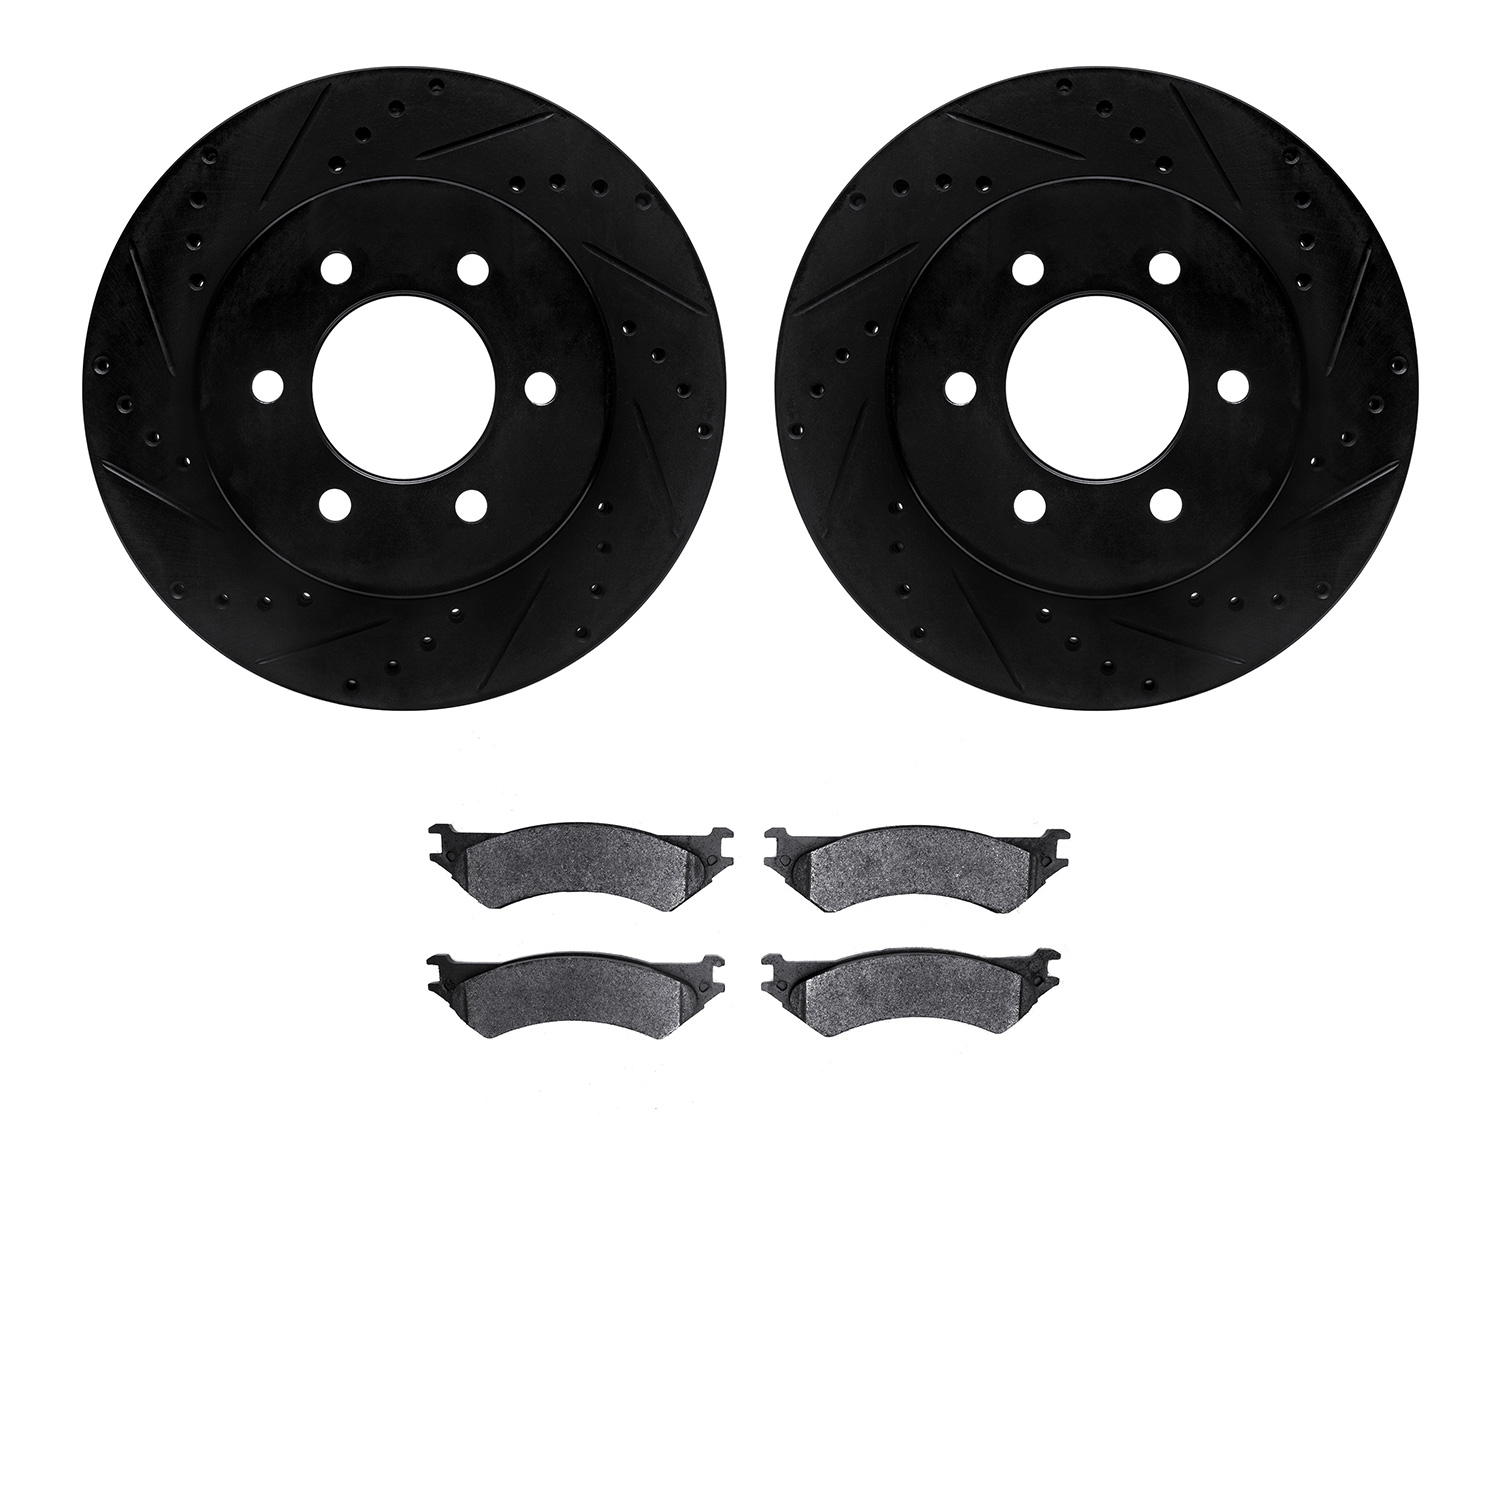 8402-54055 Drilled/Slotted Brake Rotors with Ultimate-Duty Brake Pads Kit [Black], 1999-2007 Ford/Lincoln/Mercury/Mazda, Positio